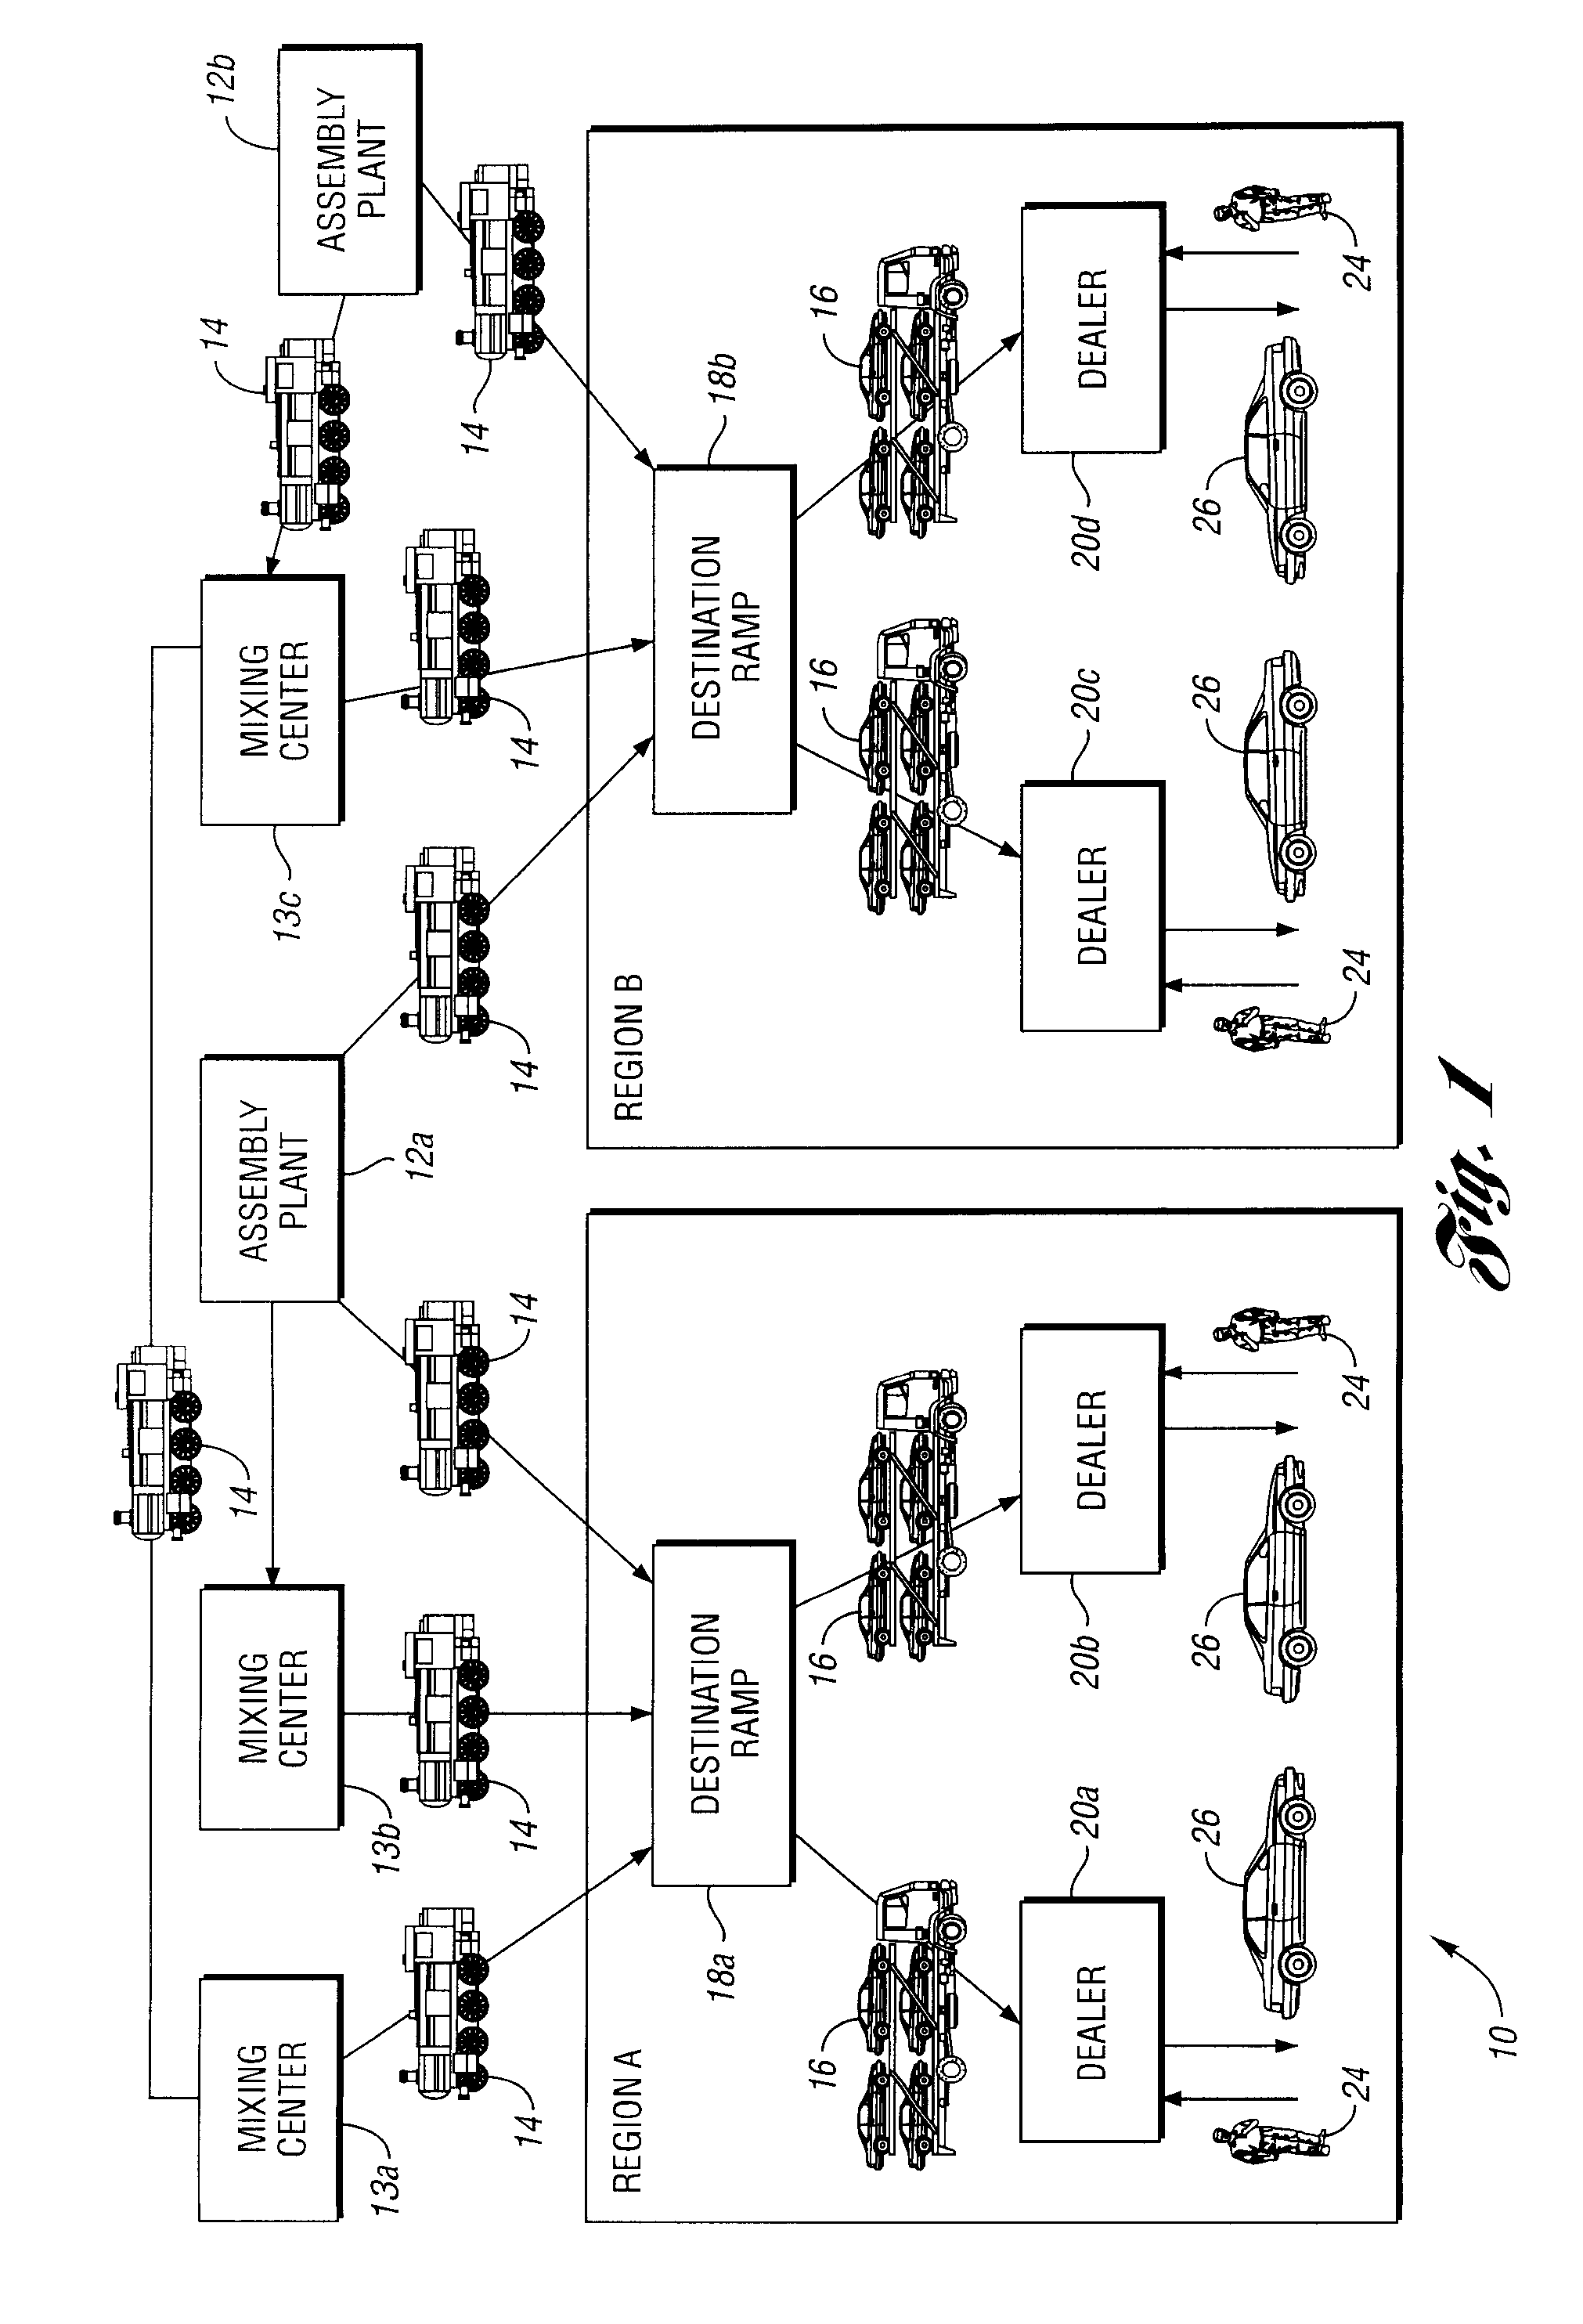 Electronic method and system for monitoring destination ramp systems